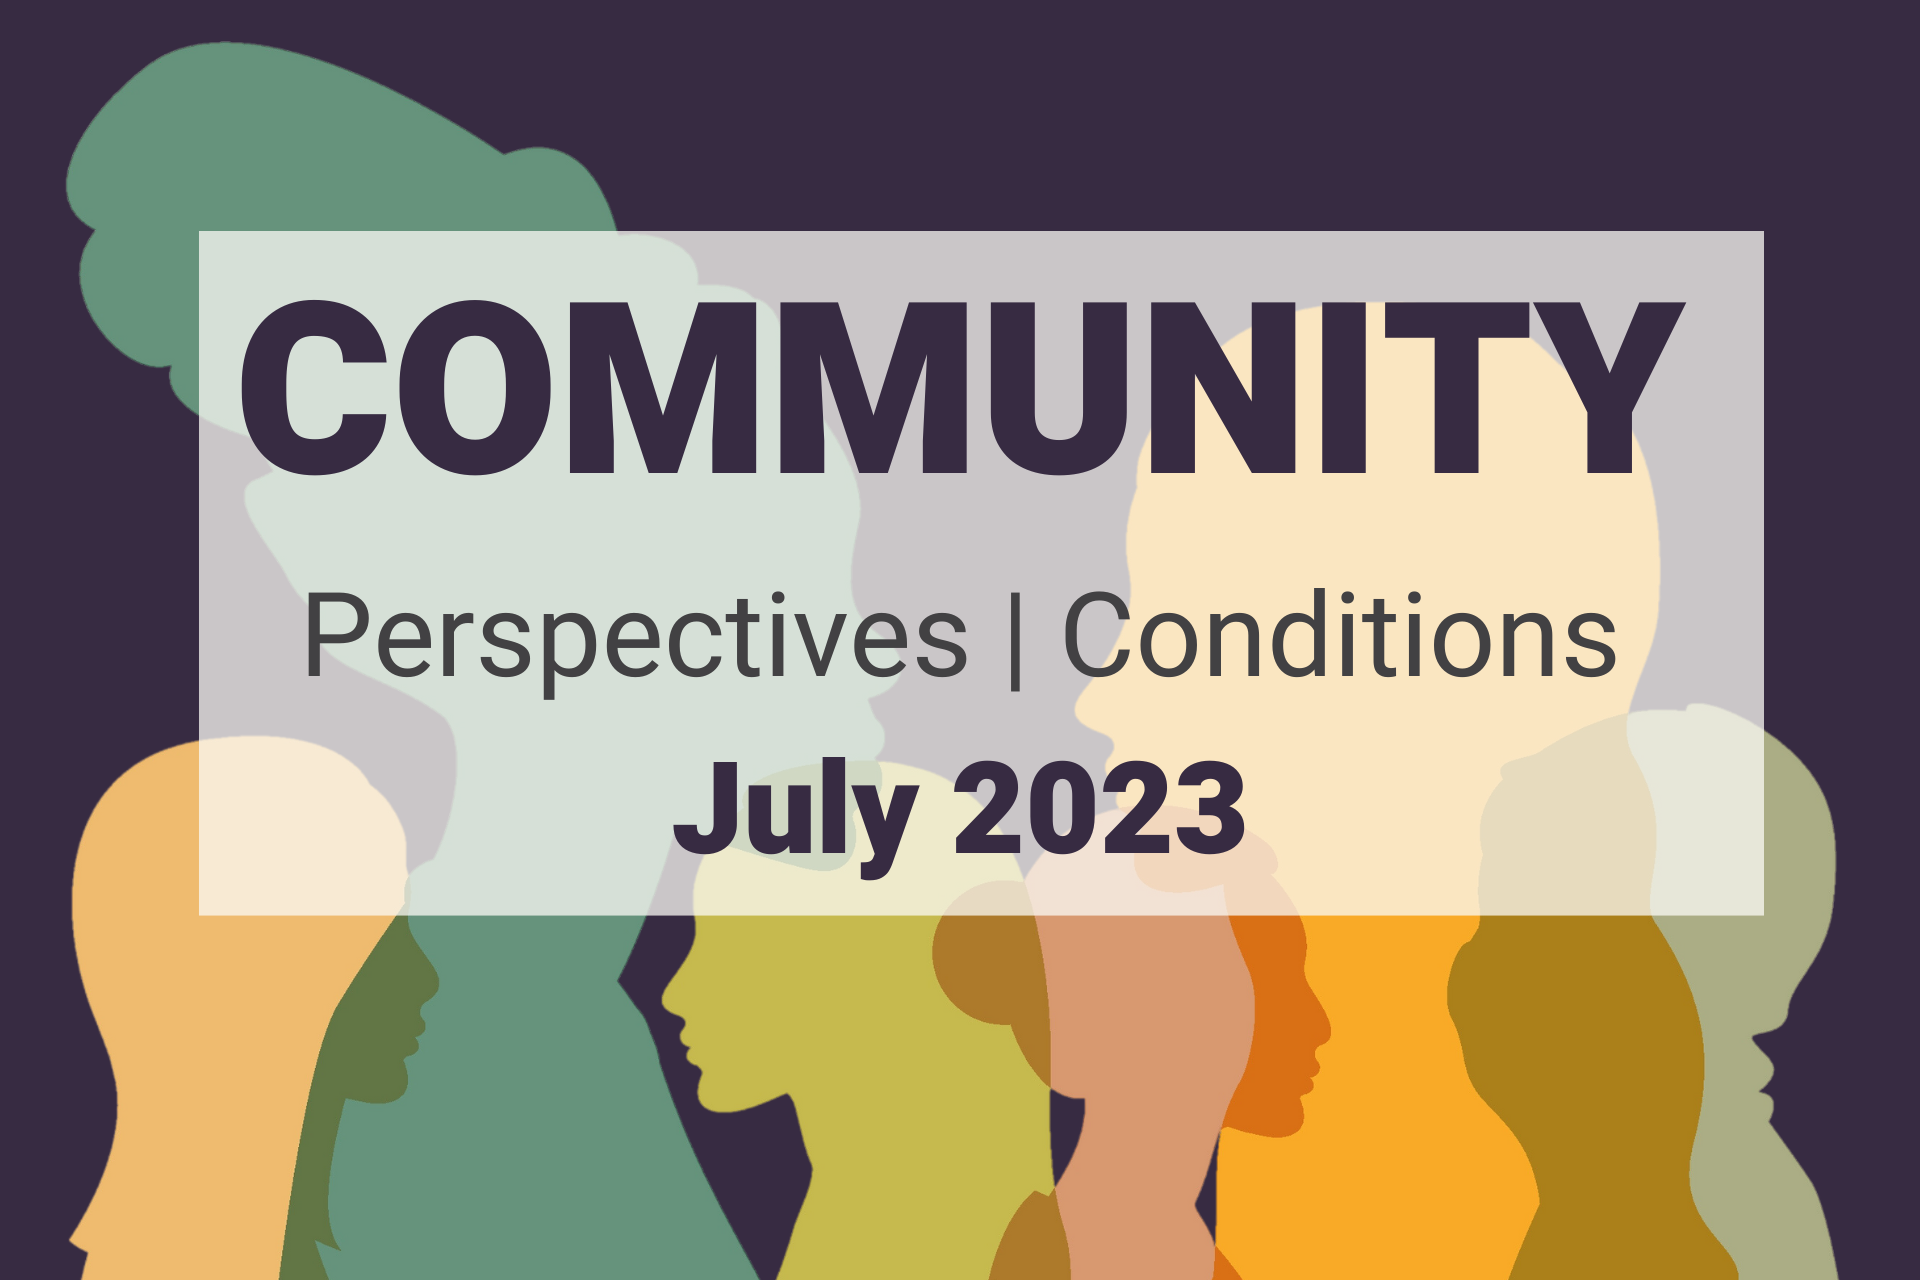 Community Perspectives and Conditions, July 2023